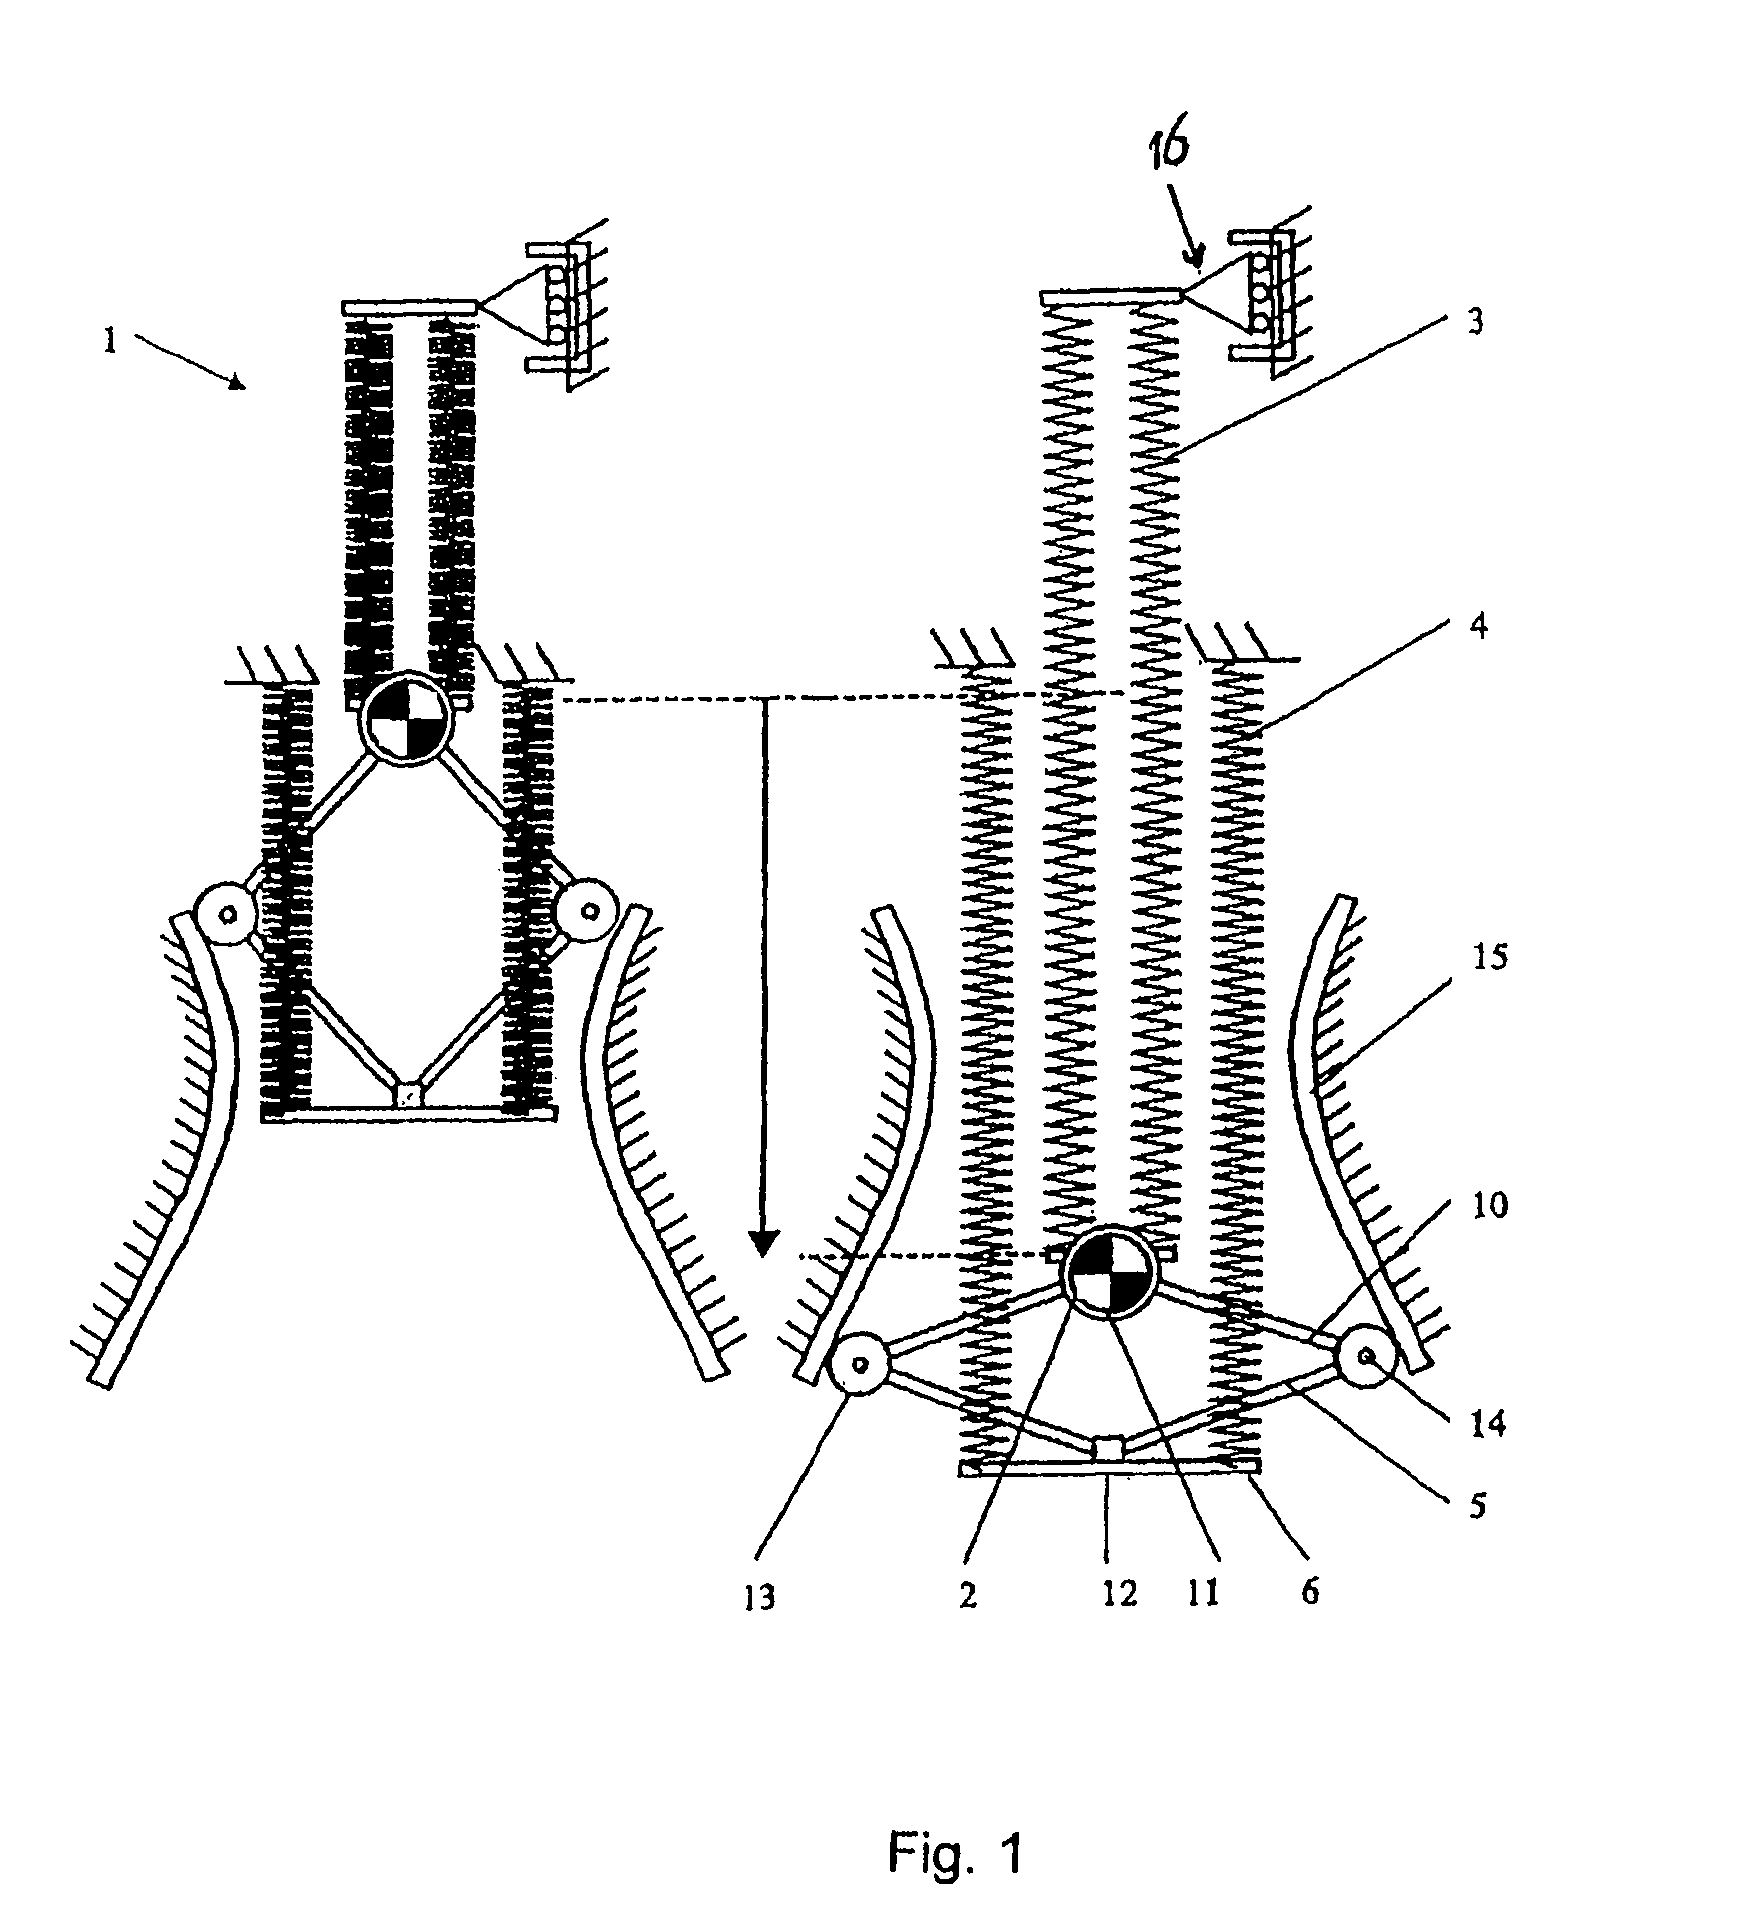 Apparatus for exercising a force on a load